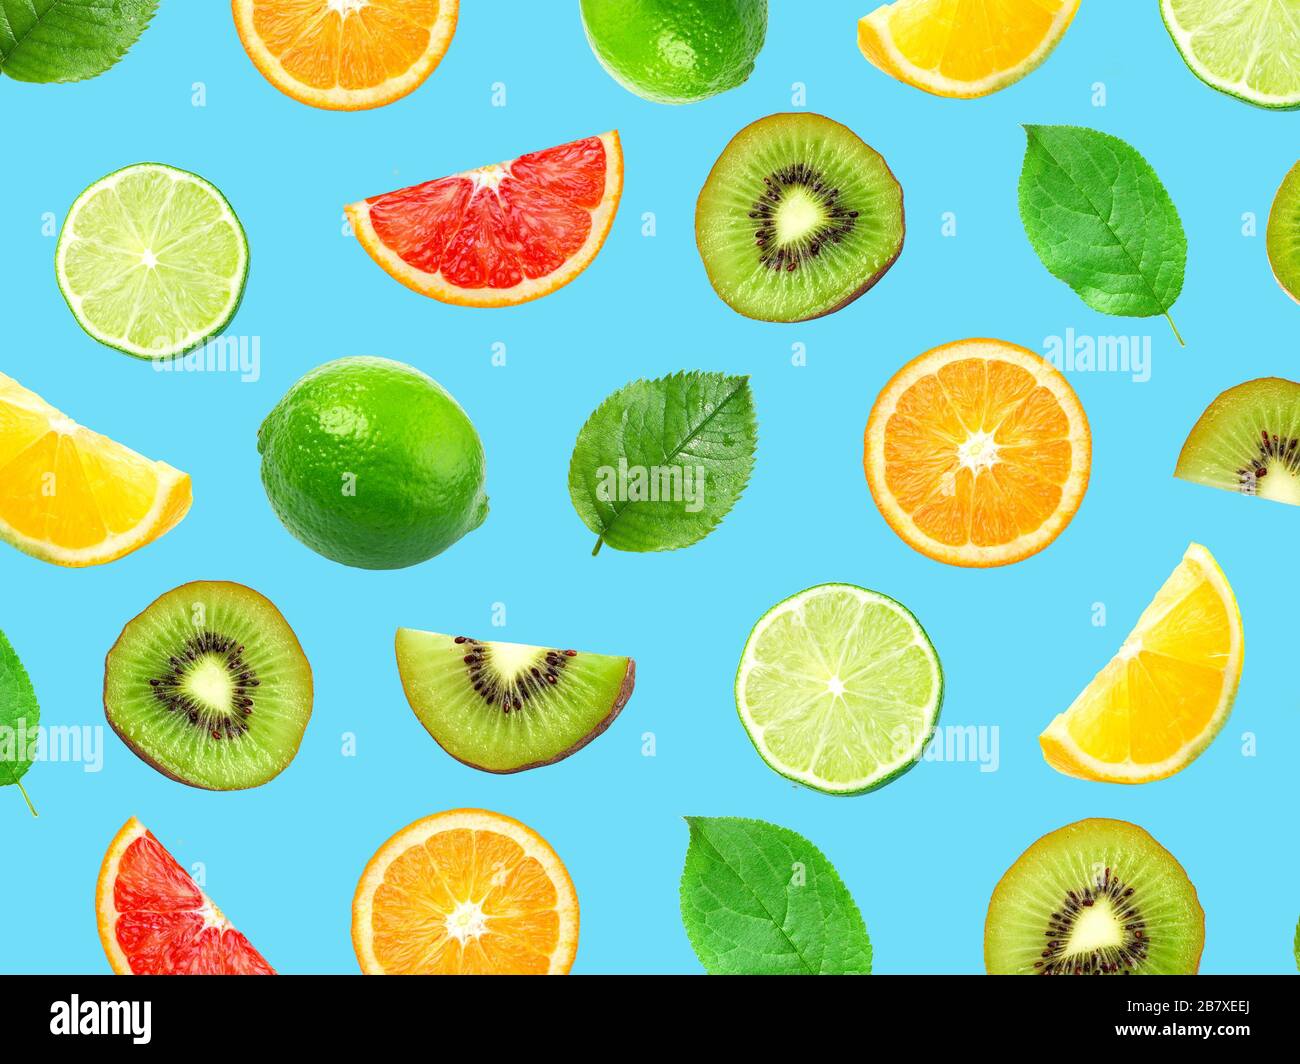 various citrus and kiwi fruits isolated on blue background, top view Stock Photo